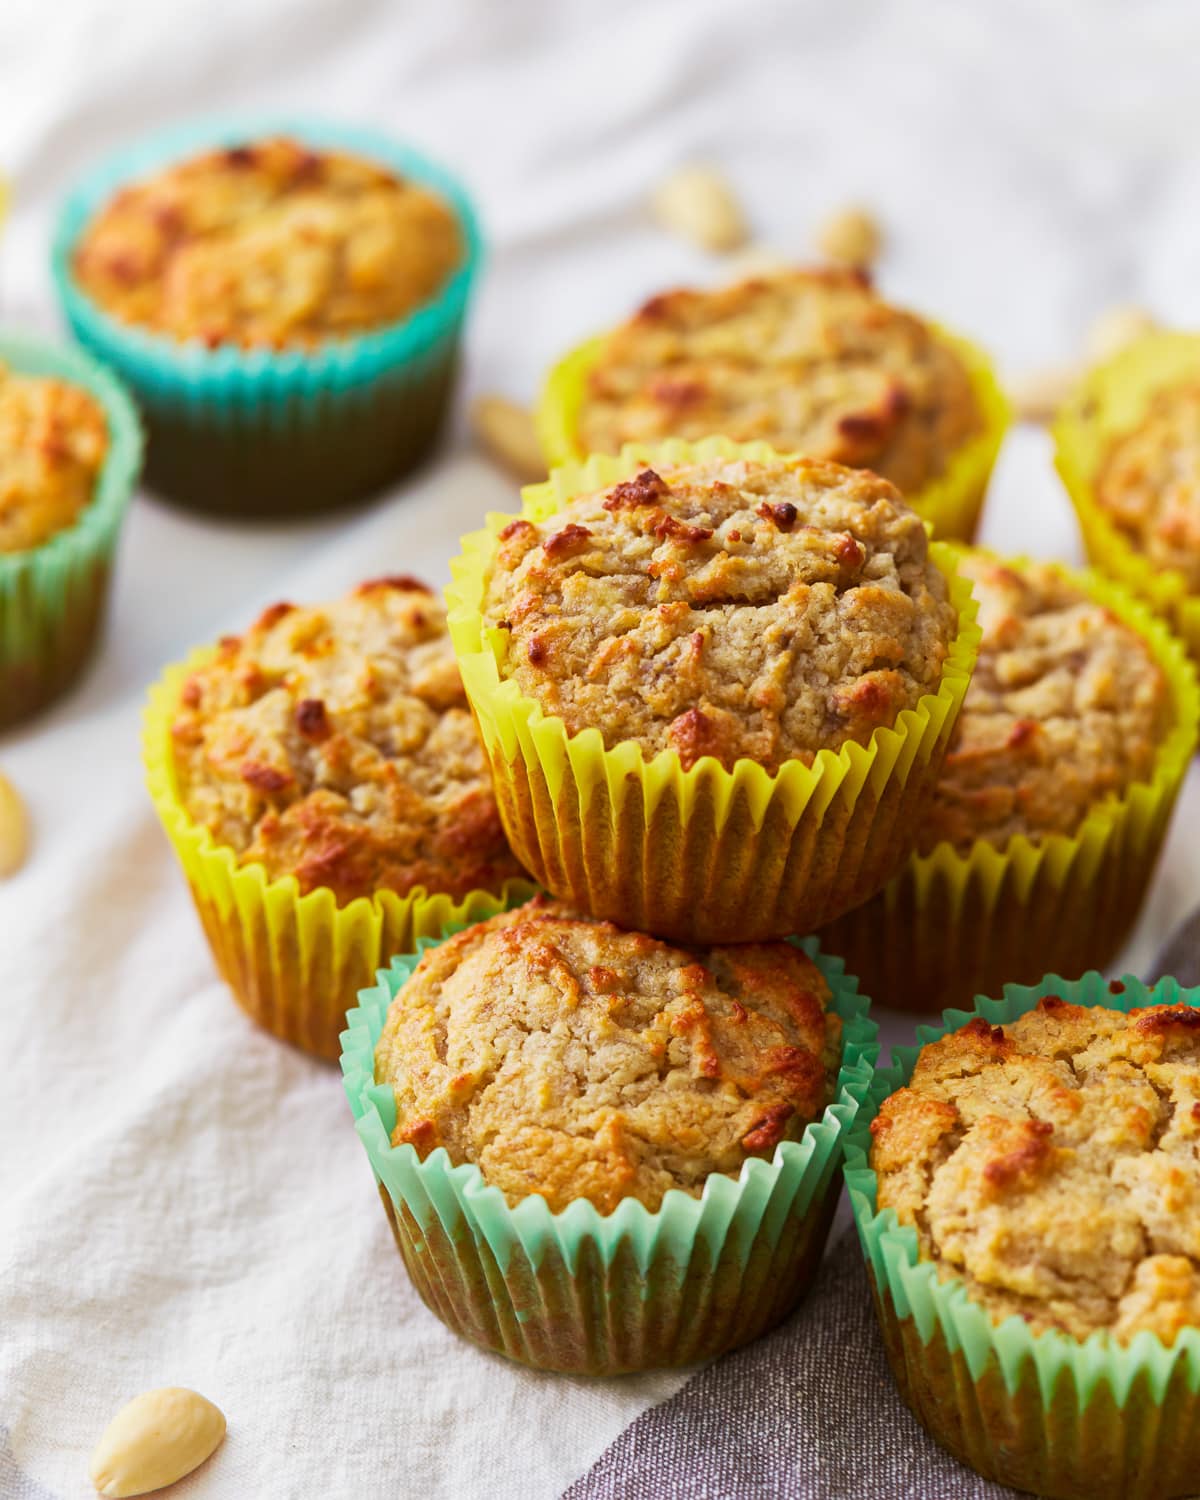 stacked almond flour banana muffins in colorful cupcake liners.